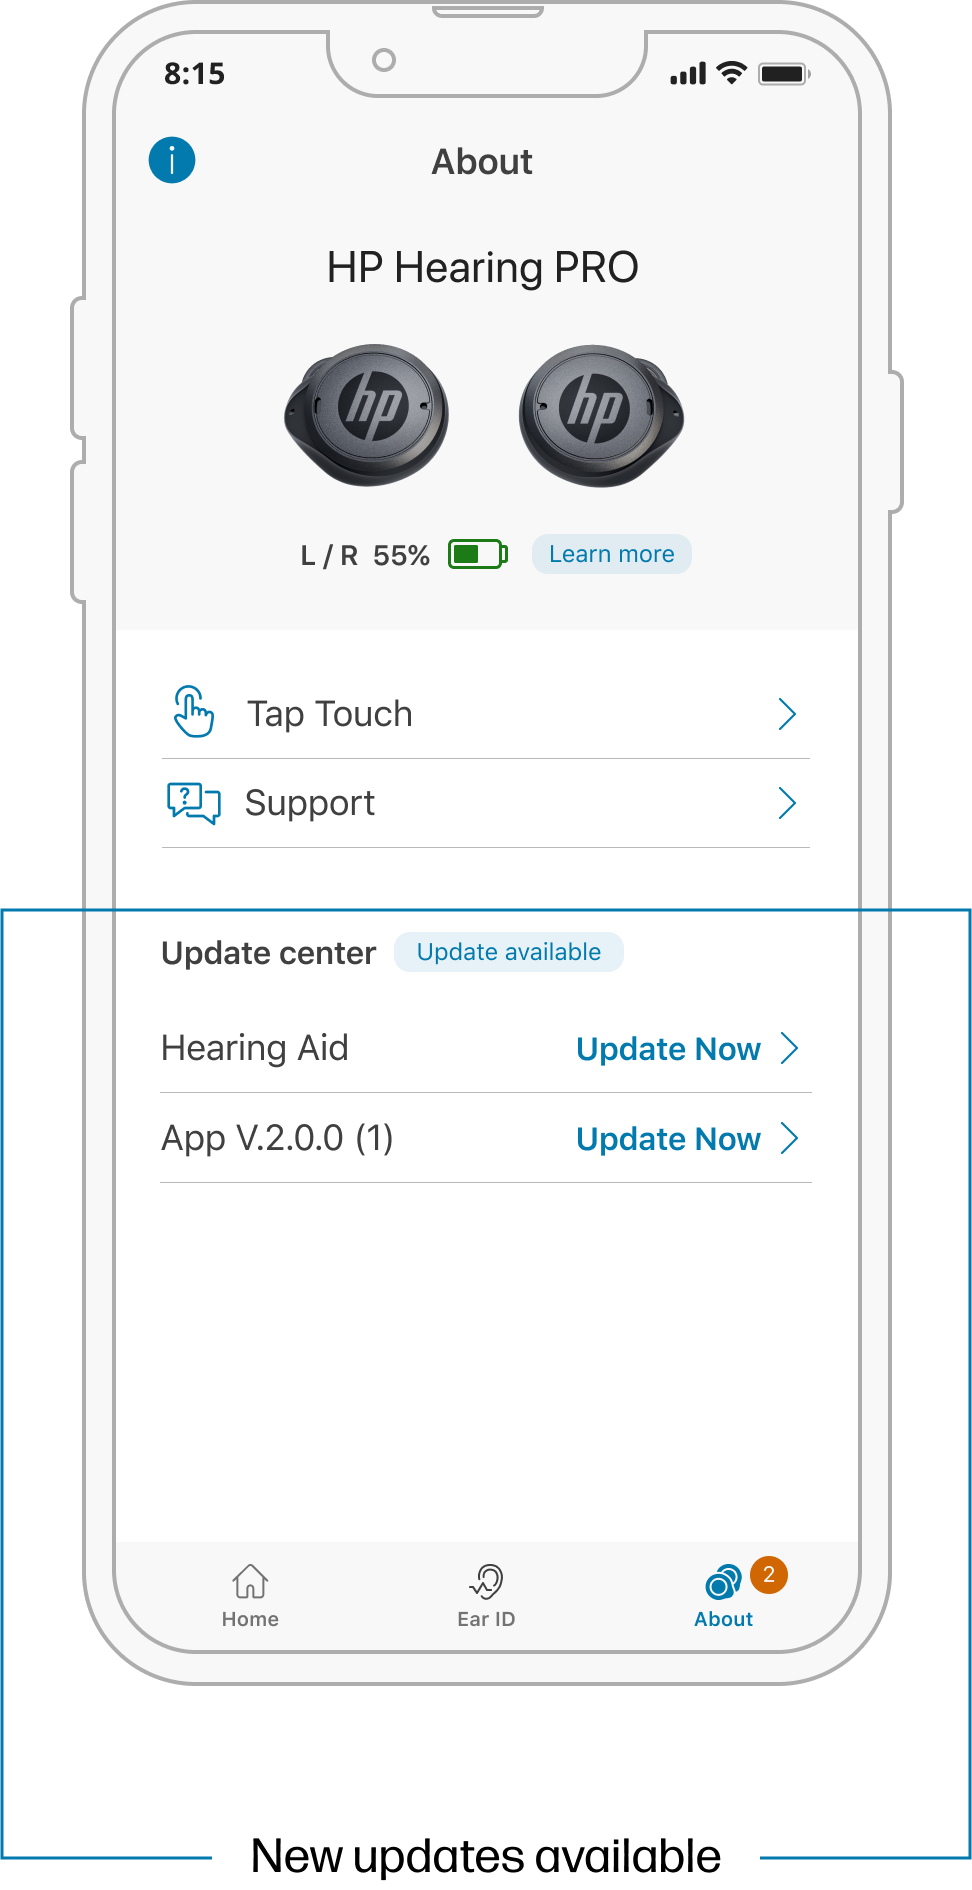 USR-SUP-002-56_-_HP_Hearing_PRO_Support_Asset___Updating_my_hearing_aids_-v1.0.png